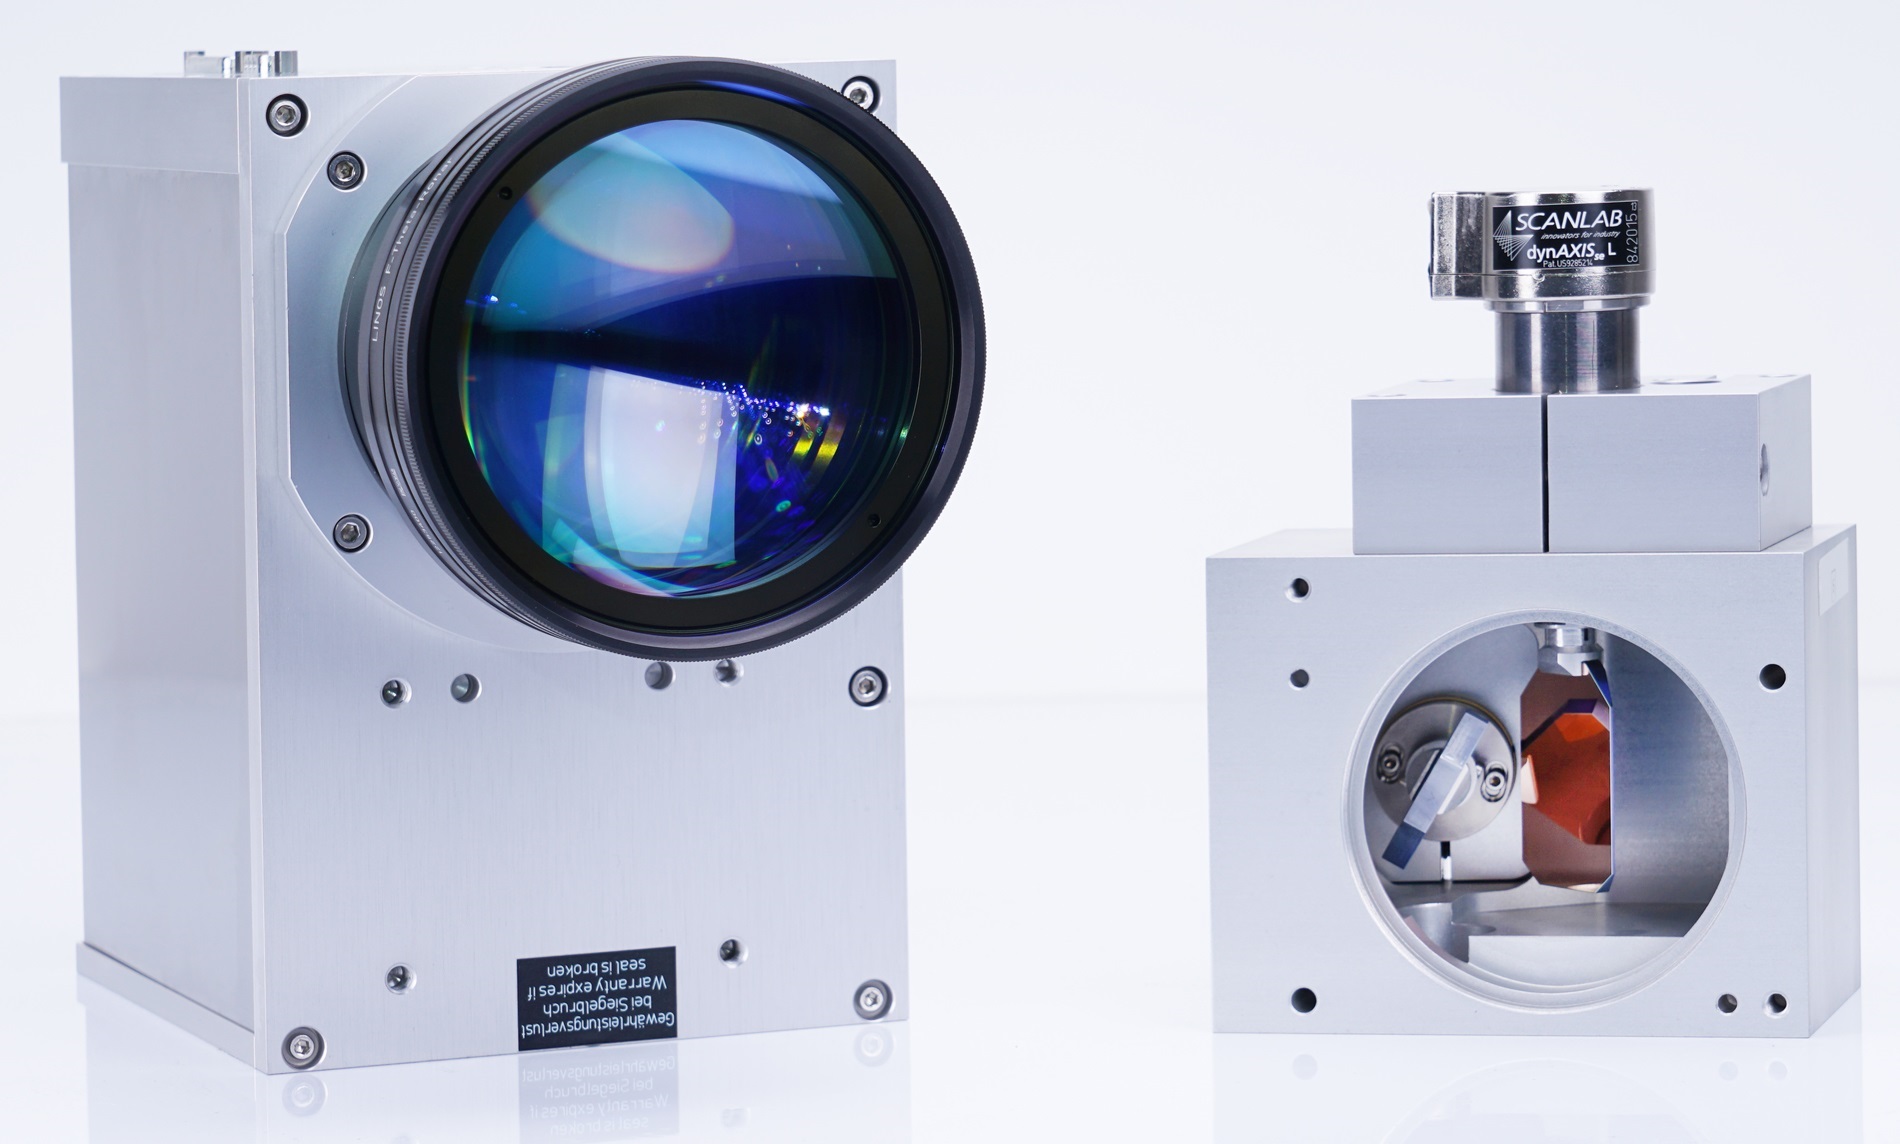 New digital-encoder-equipped 2D scan heads: intelliSCANse 20 and 30